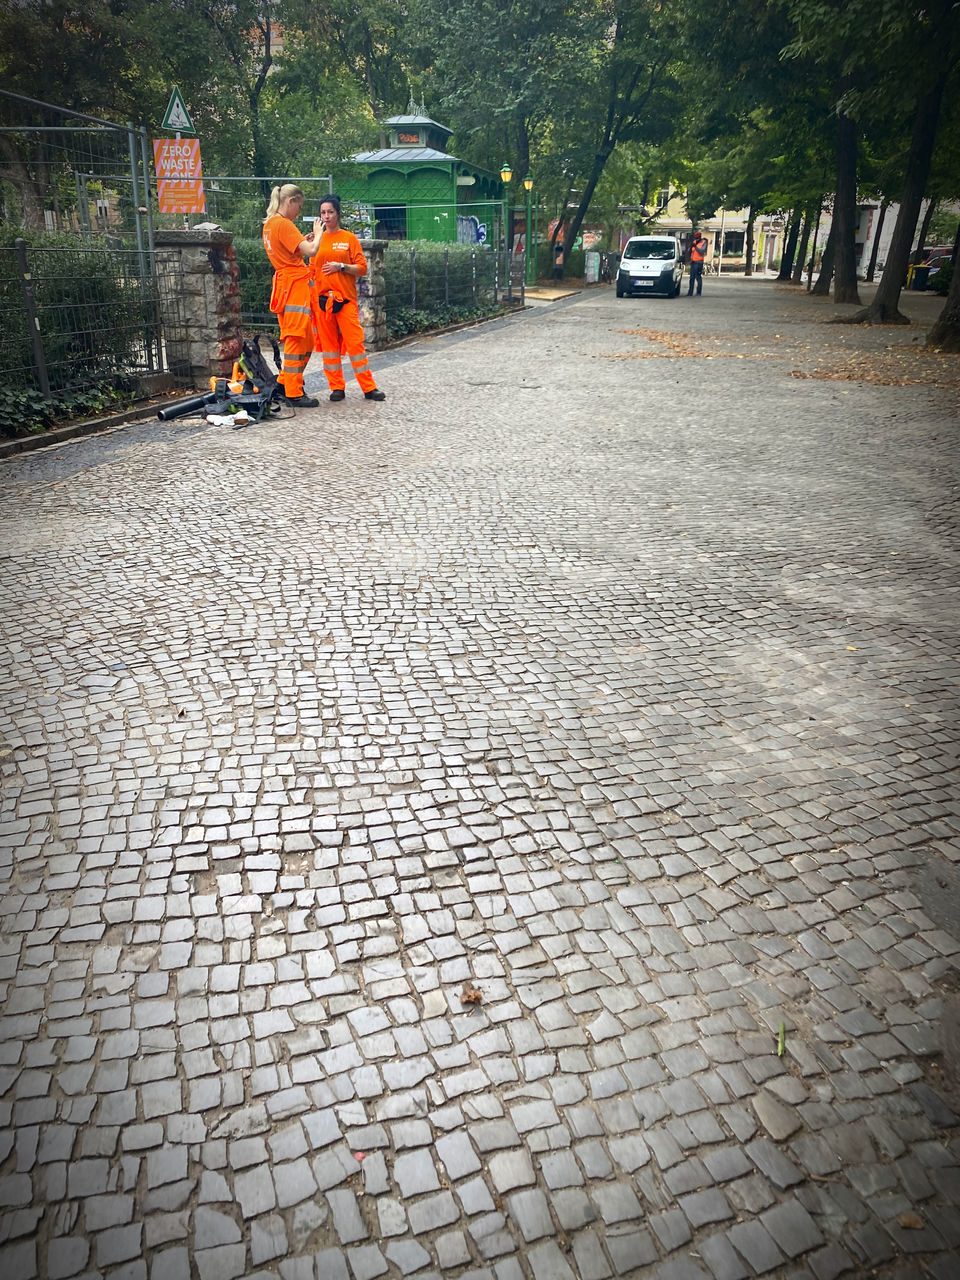 road surface, asphalt, street, city, transportation, cobblestone, men, road, architecture, occupation, day, footpath, mode of transportation, full length, tree, working, paving stone, sidewalk, outdoors, clothing, plant, two people, protection, nature, walking, adult, land vehicle, flooring, walkway